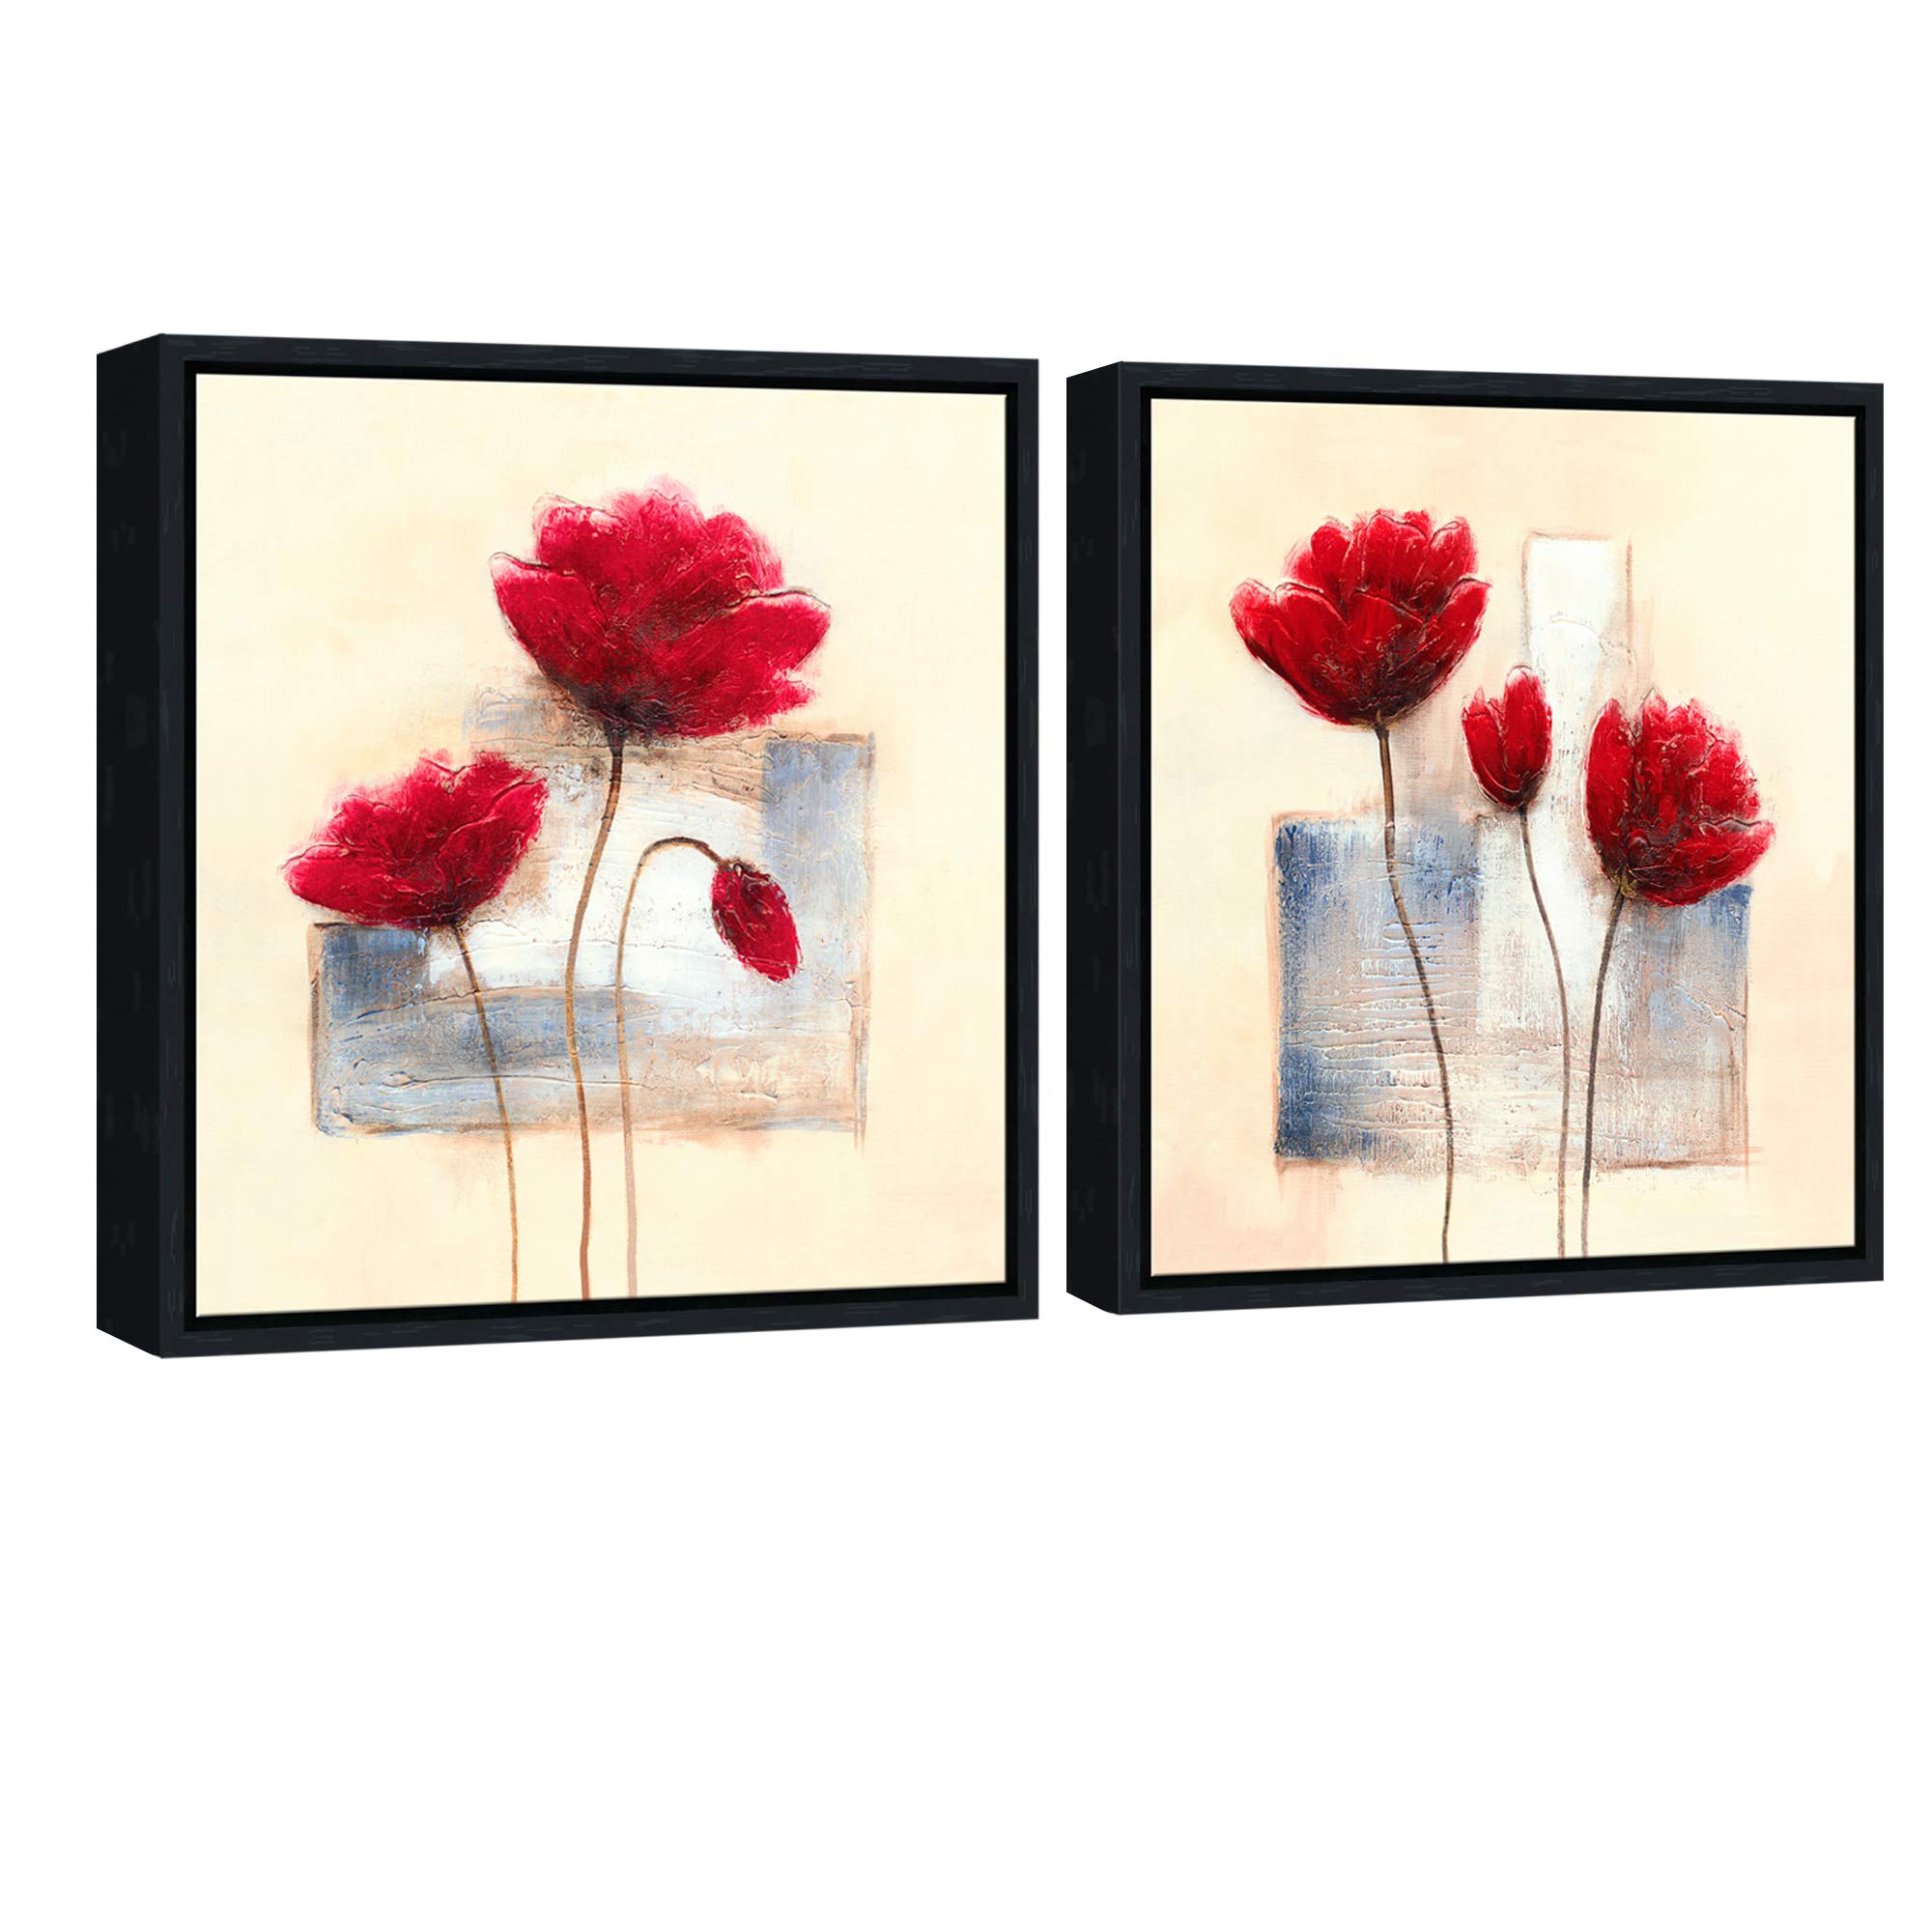 Wieco Art Framed Wall Art Charming Spring Canvas Prints Abstract Floral Oil Paintings Style Pictures on Canvas Wall Art Framed Canvas Wall Decor fo...